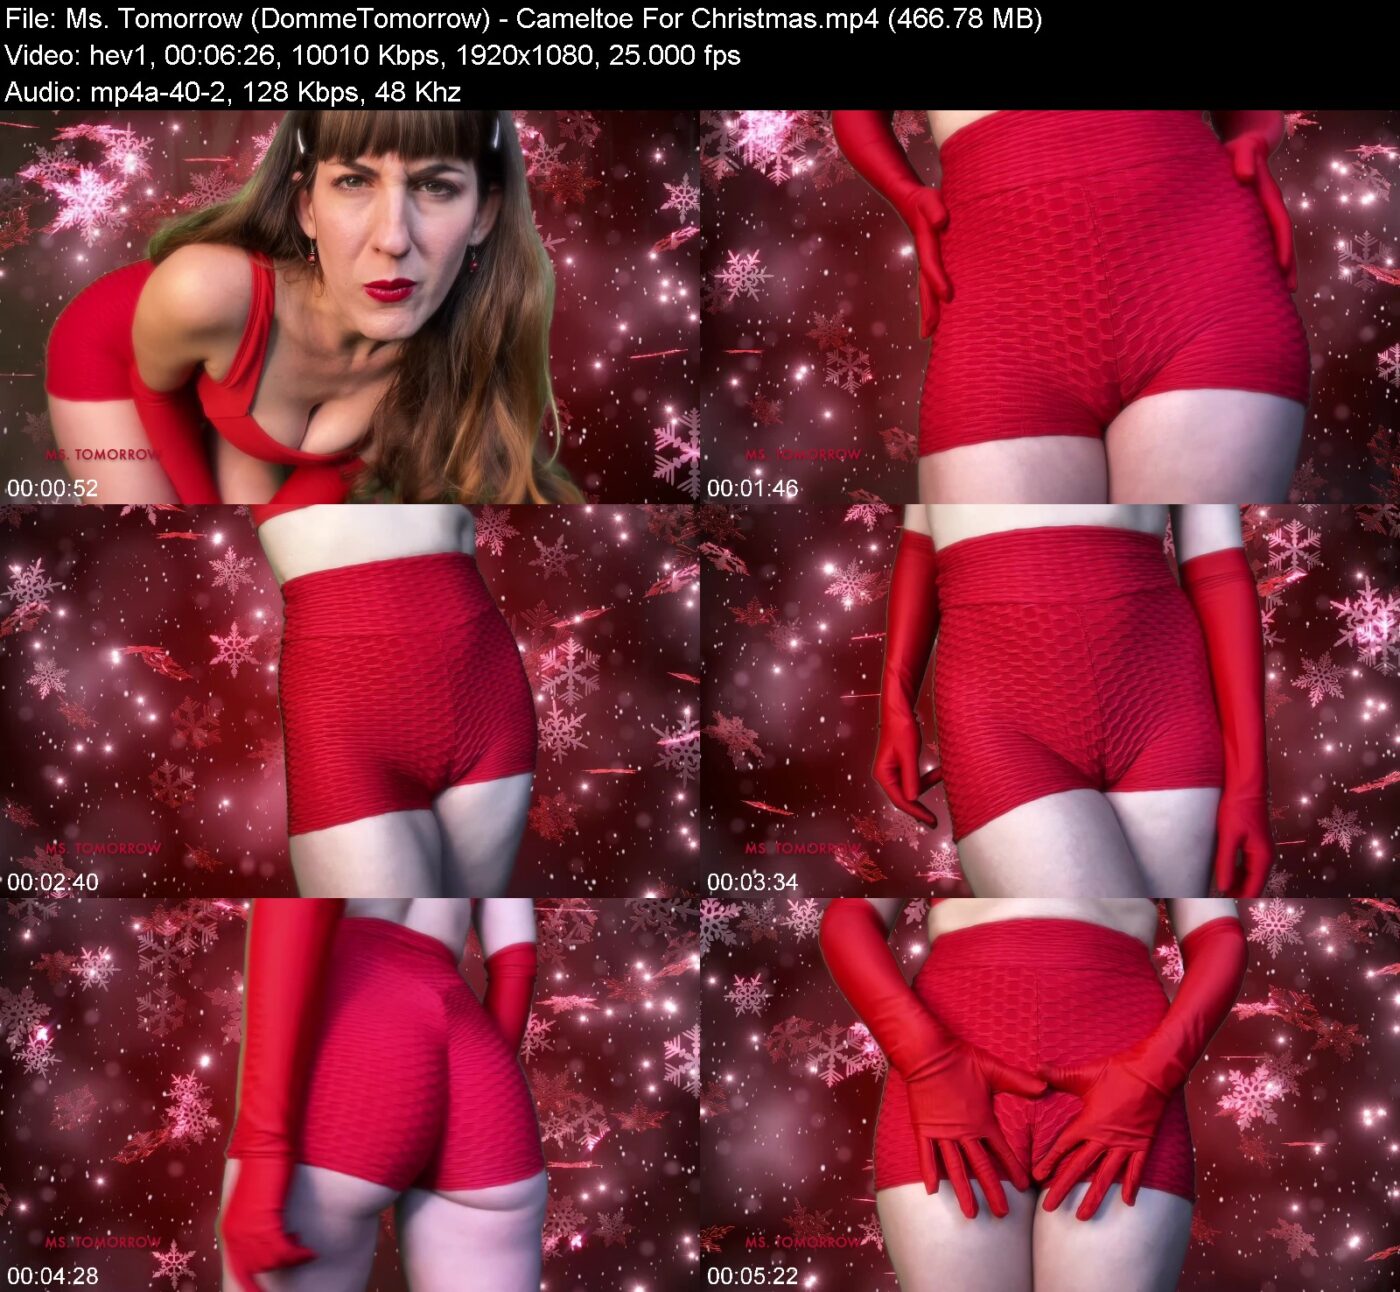 Actress: Ms. Tomorrow (DommeTomorrow). Title and Studio: Cameltoe For Christmas